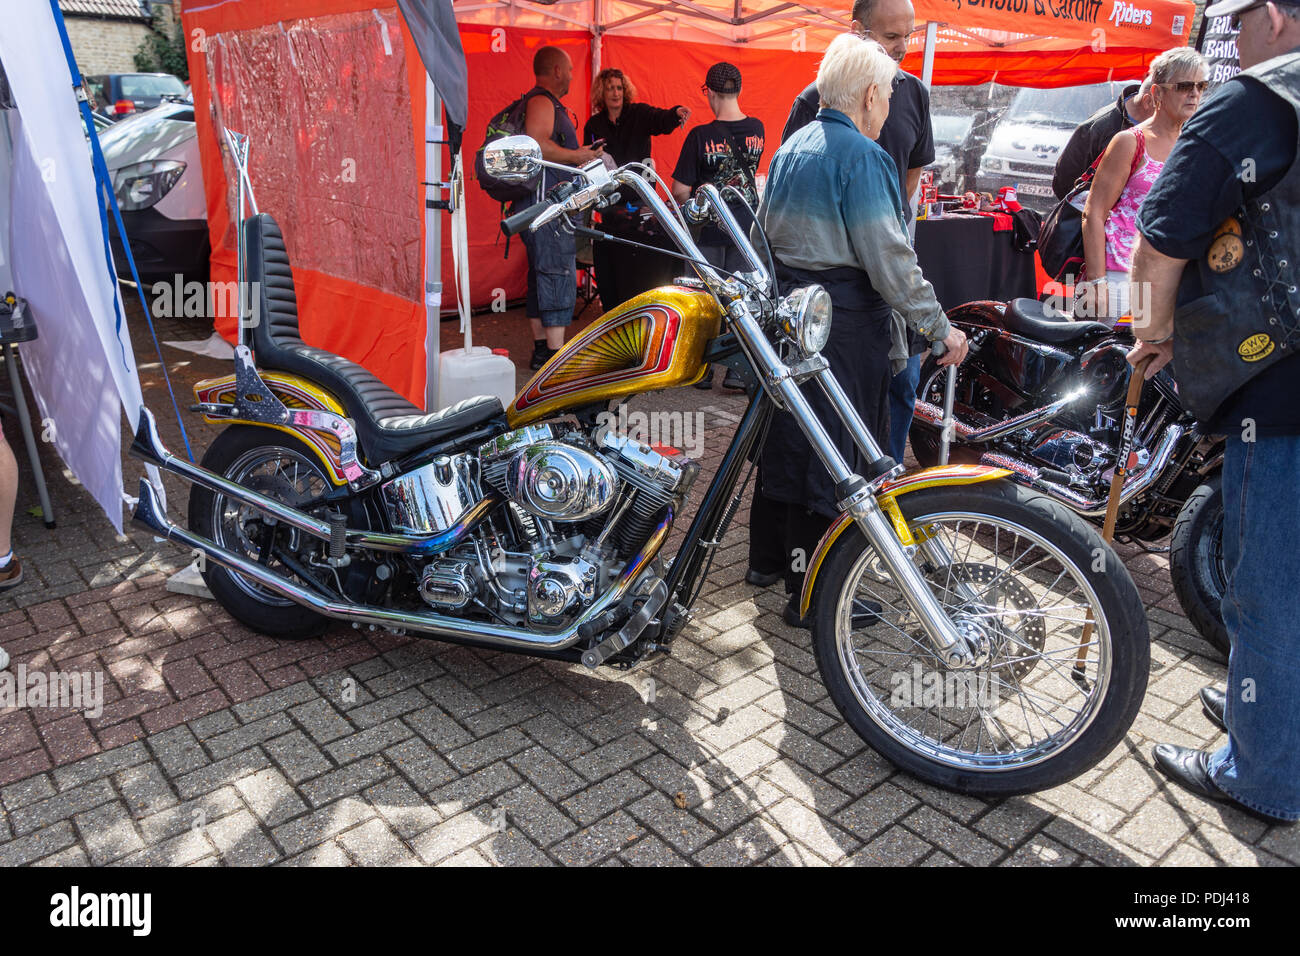 Customized hard tail chopper motorcycle  with glitter paint fuel tank on display at Calne bike meet Stock Photo